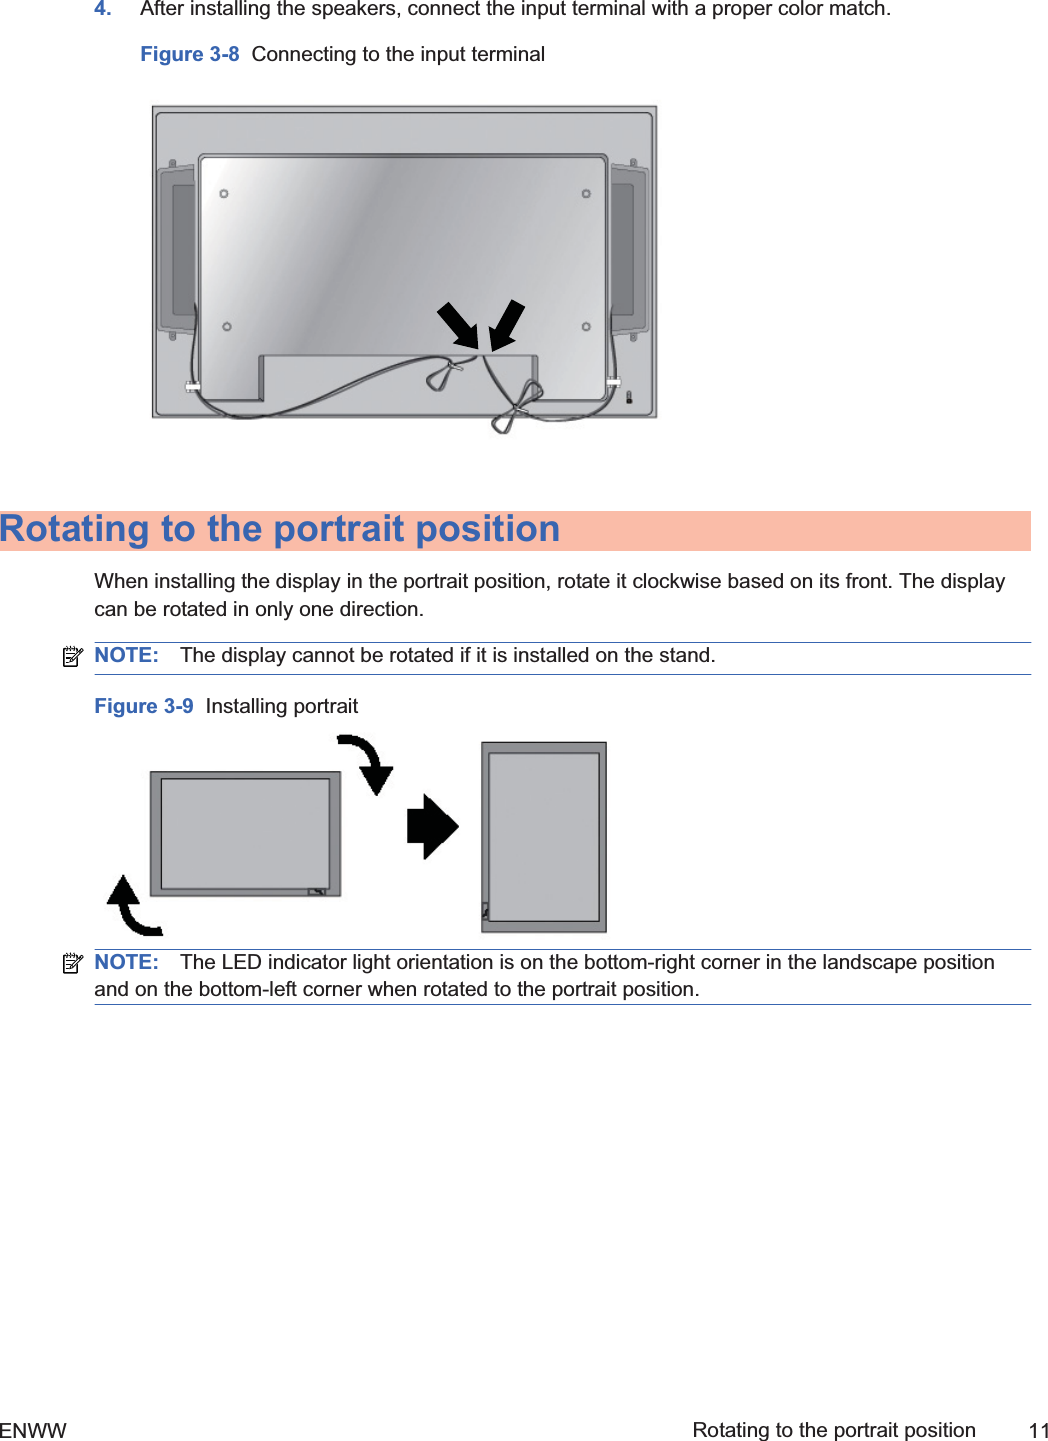 4. After installing the speakers, connect the input terminal with a proper color match.Figure 3-8  Connecting to the input terminalRotating to the portrait positionWhen installing the display in the portrait position, rotate it clockwise based on its front. The displaycan be rotated in only one direction.NOTE: The display cannot be rotated if it is installed on the stand.Figure 3-9  Installing portraitNOTE: The LED indicator light orientation is on the bottom-right corner in the landscape positionand on the bottom-left corner when rotated to the portrait position.ENWW Rotating to the portrait position 112ndDraft